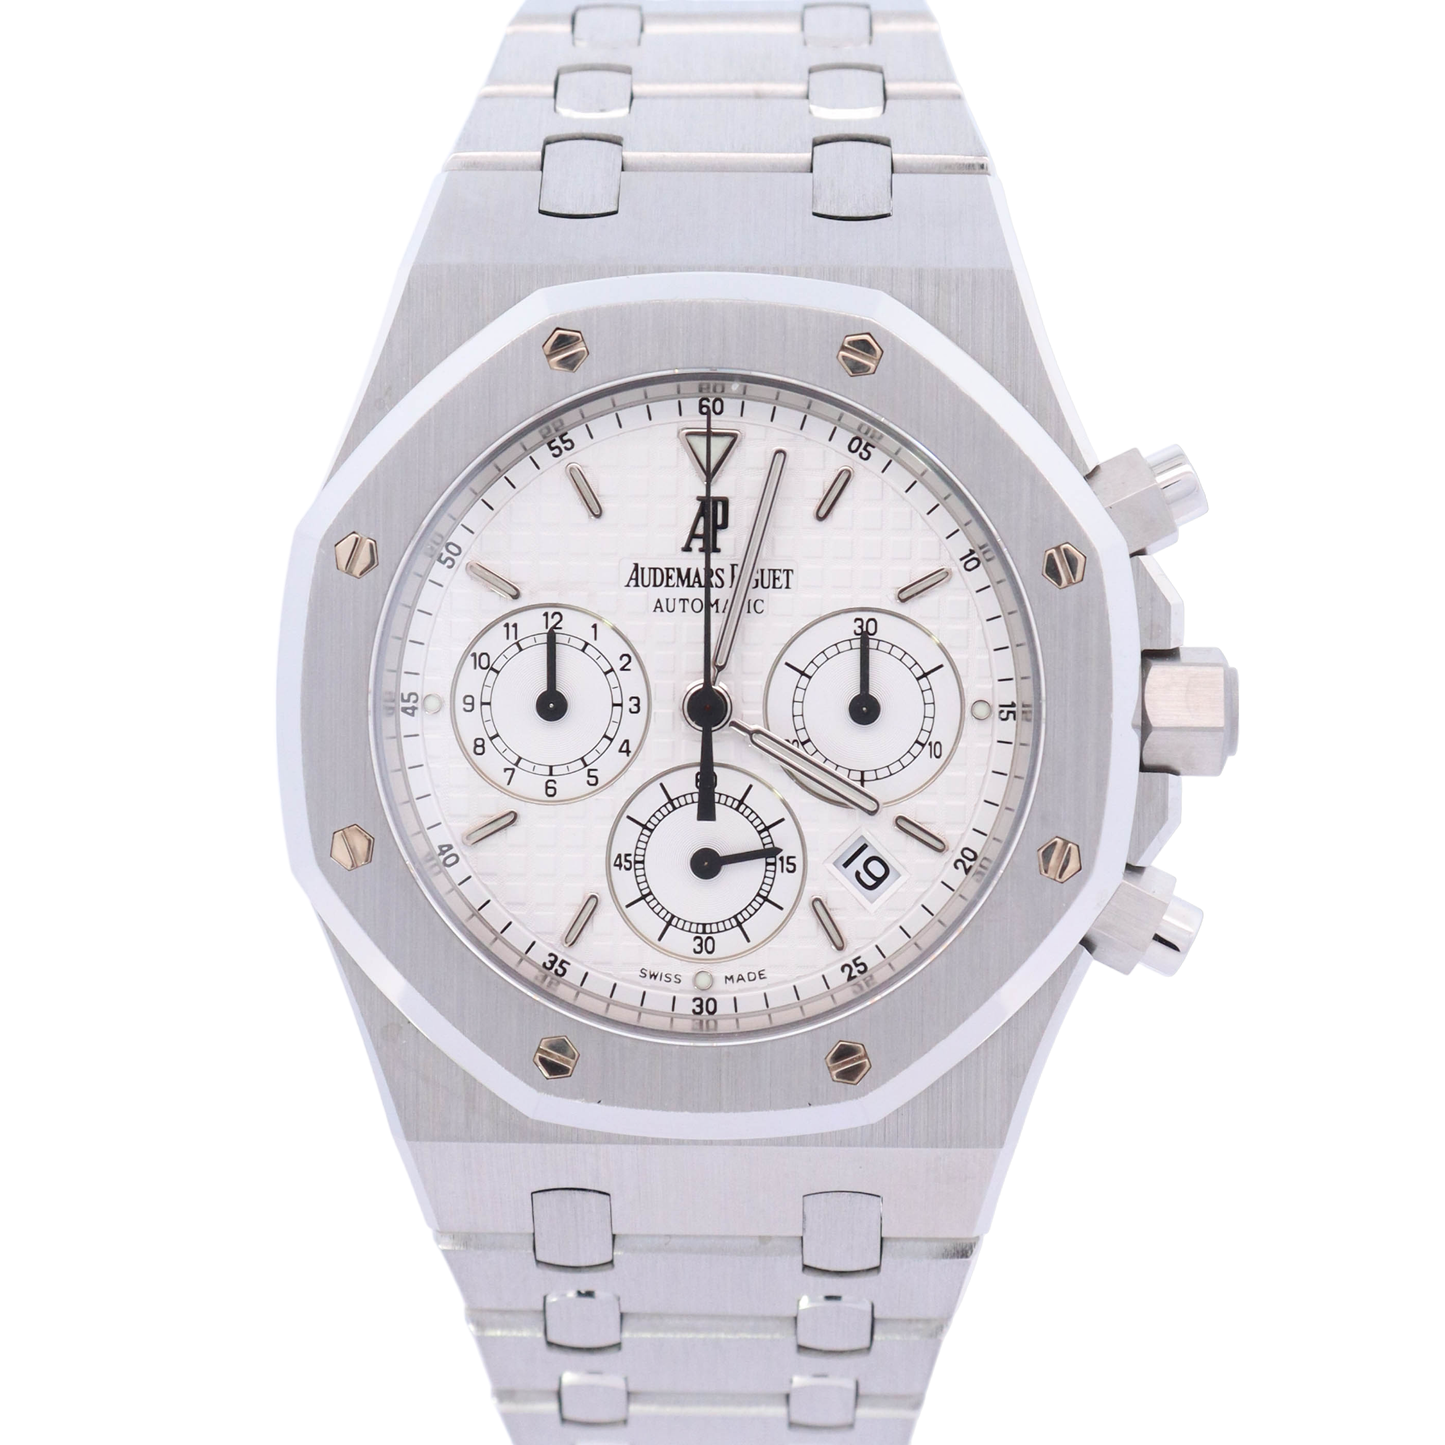 Audemars Piguet Royal Oak 39mm Stainless Steel White Chronograph Dial Watch Reference# 25860ST.OO.1110ST.05 - Happy Jewelers Fine Jewelry Lifetime Warranty